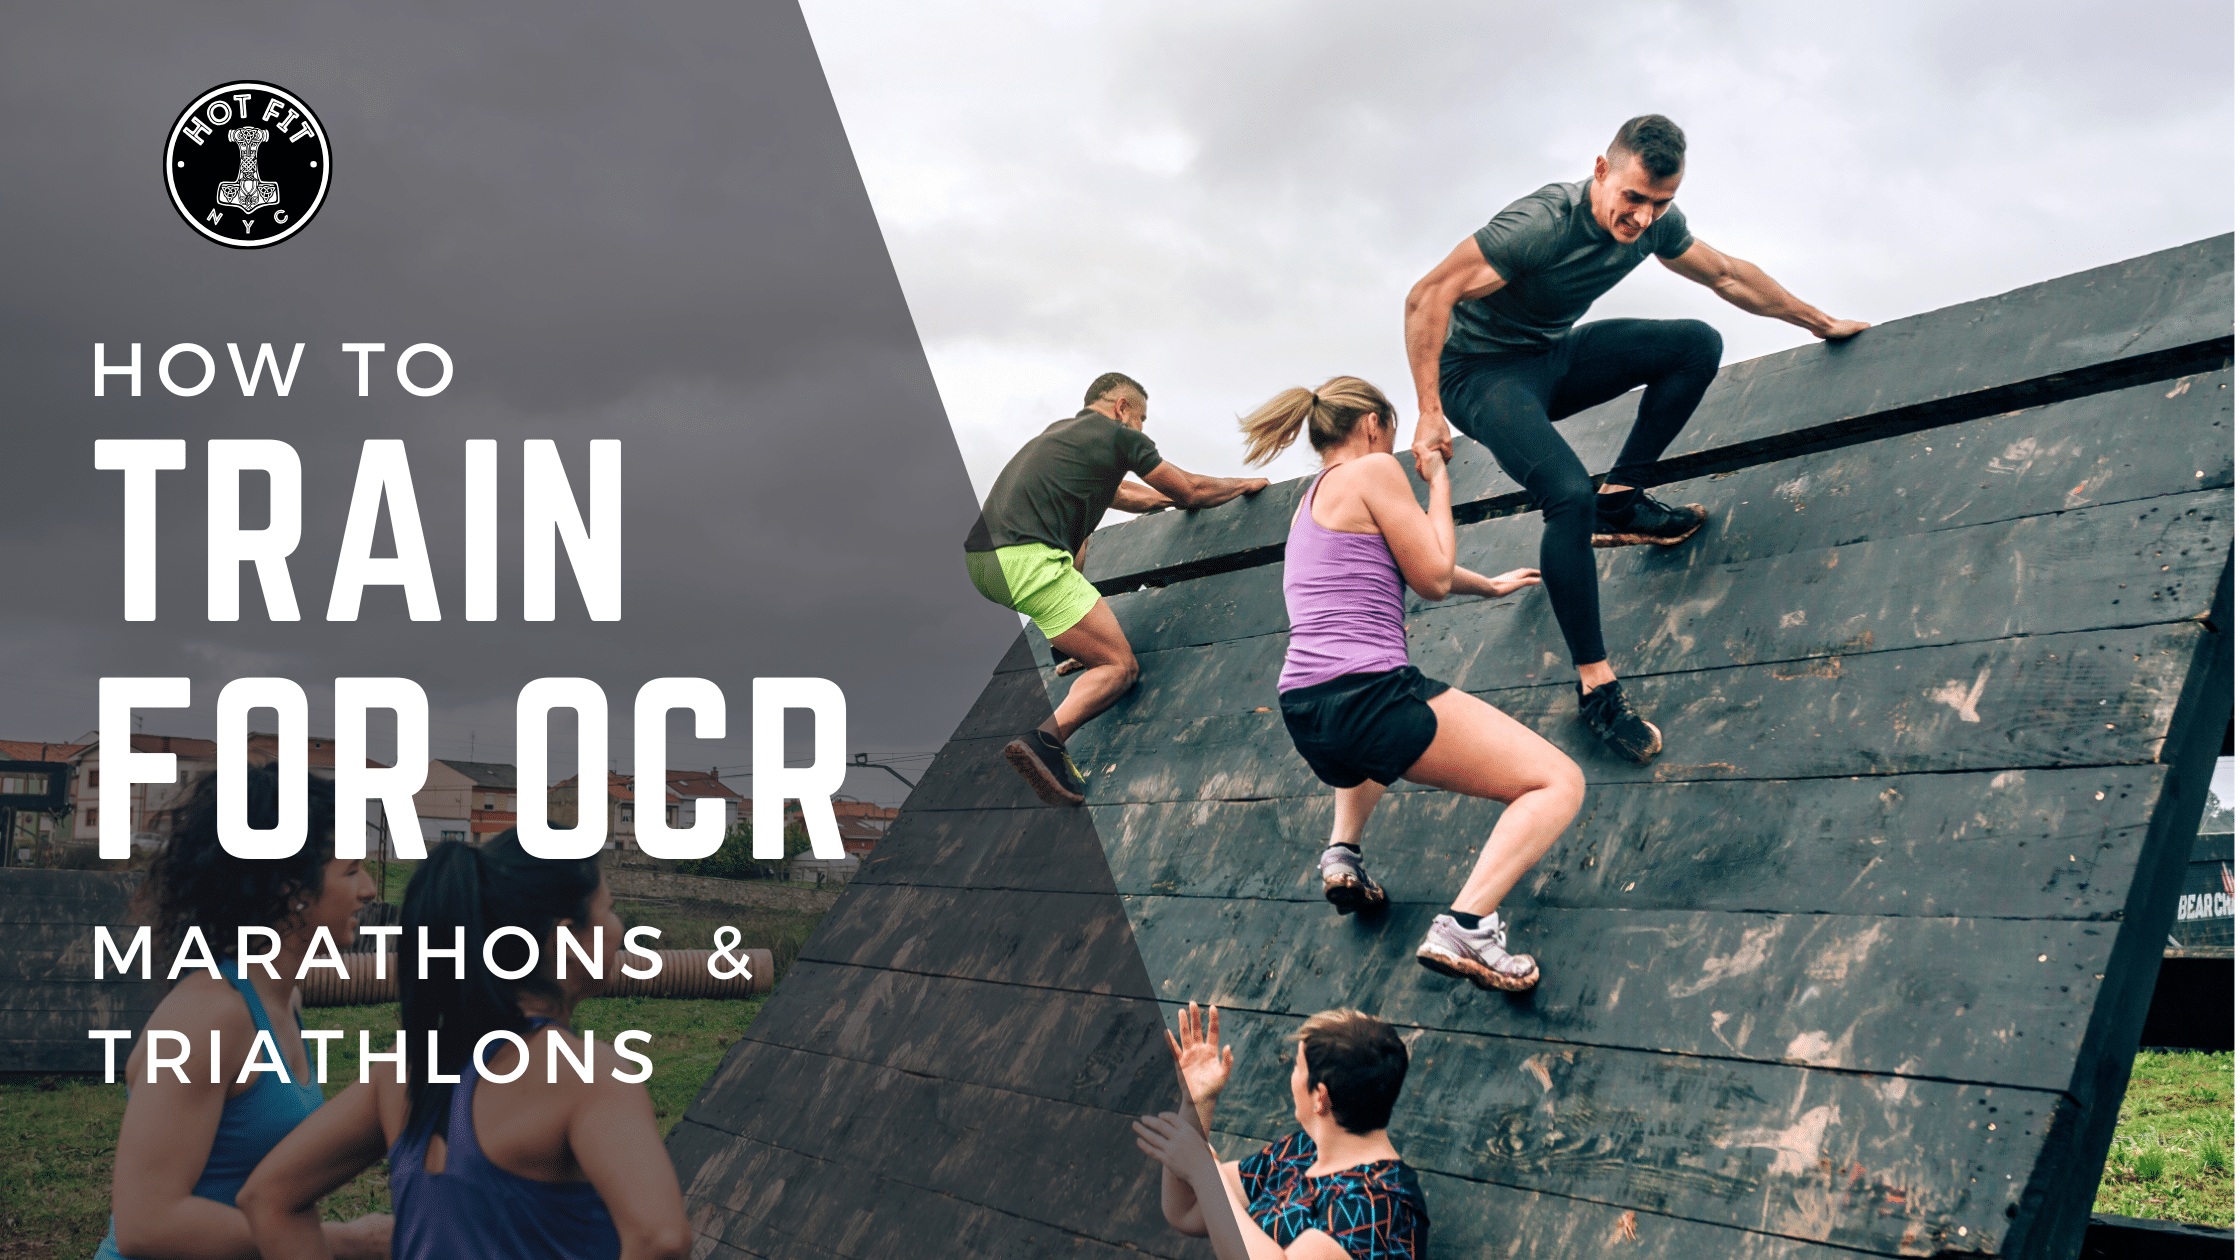 How to Train for OCR (Obstacle Course Racing), Marathons, and Triathlons